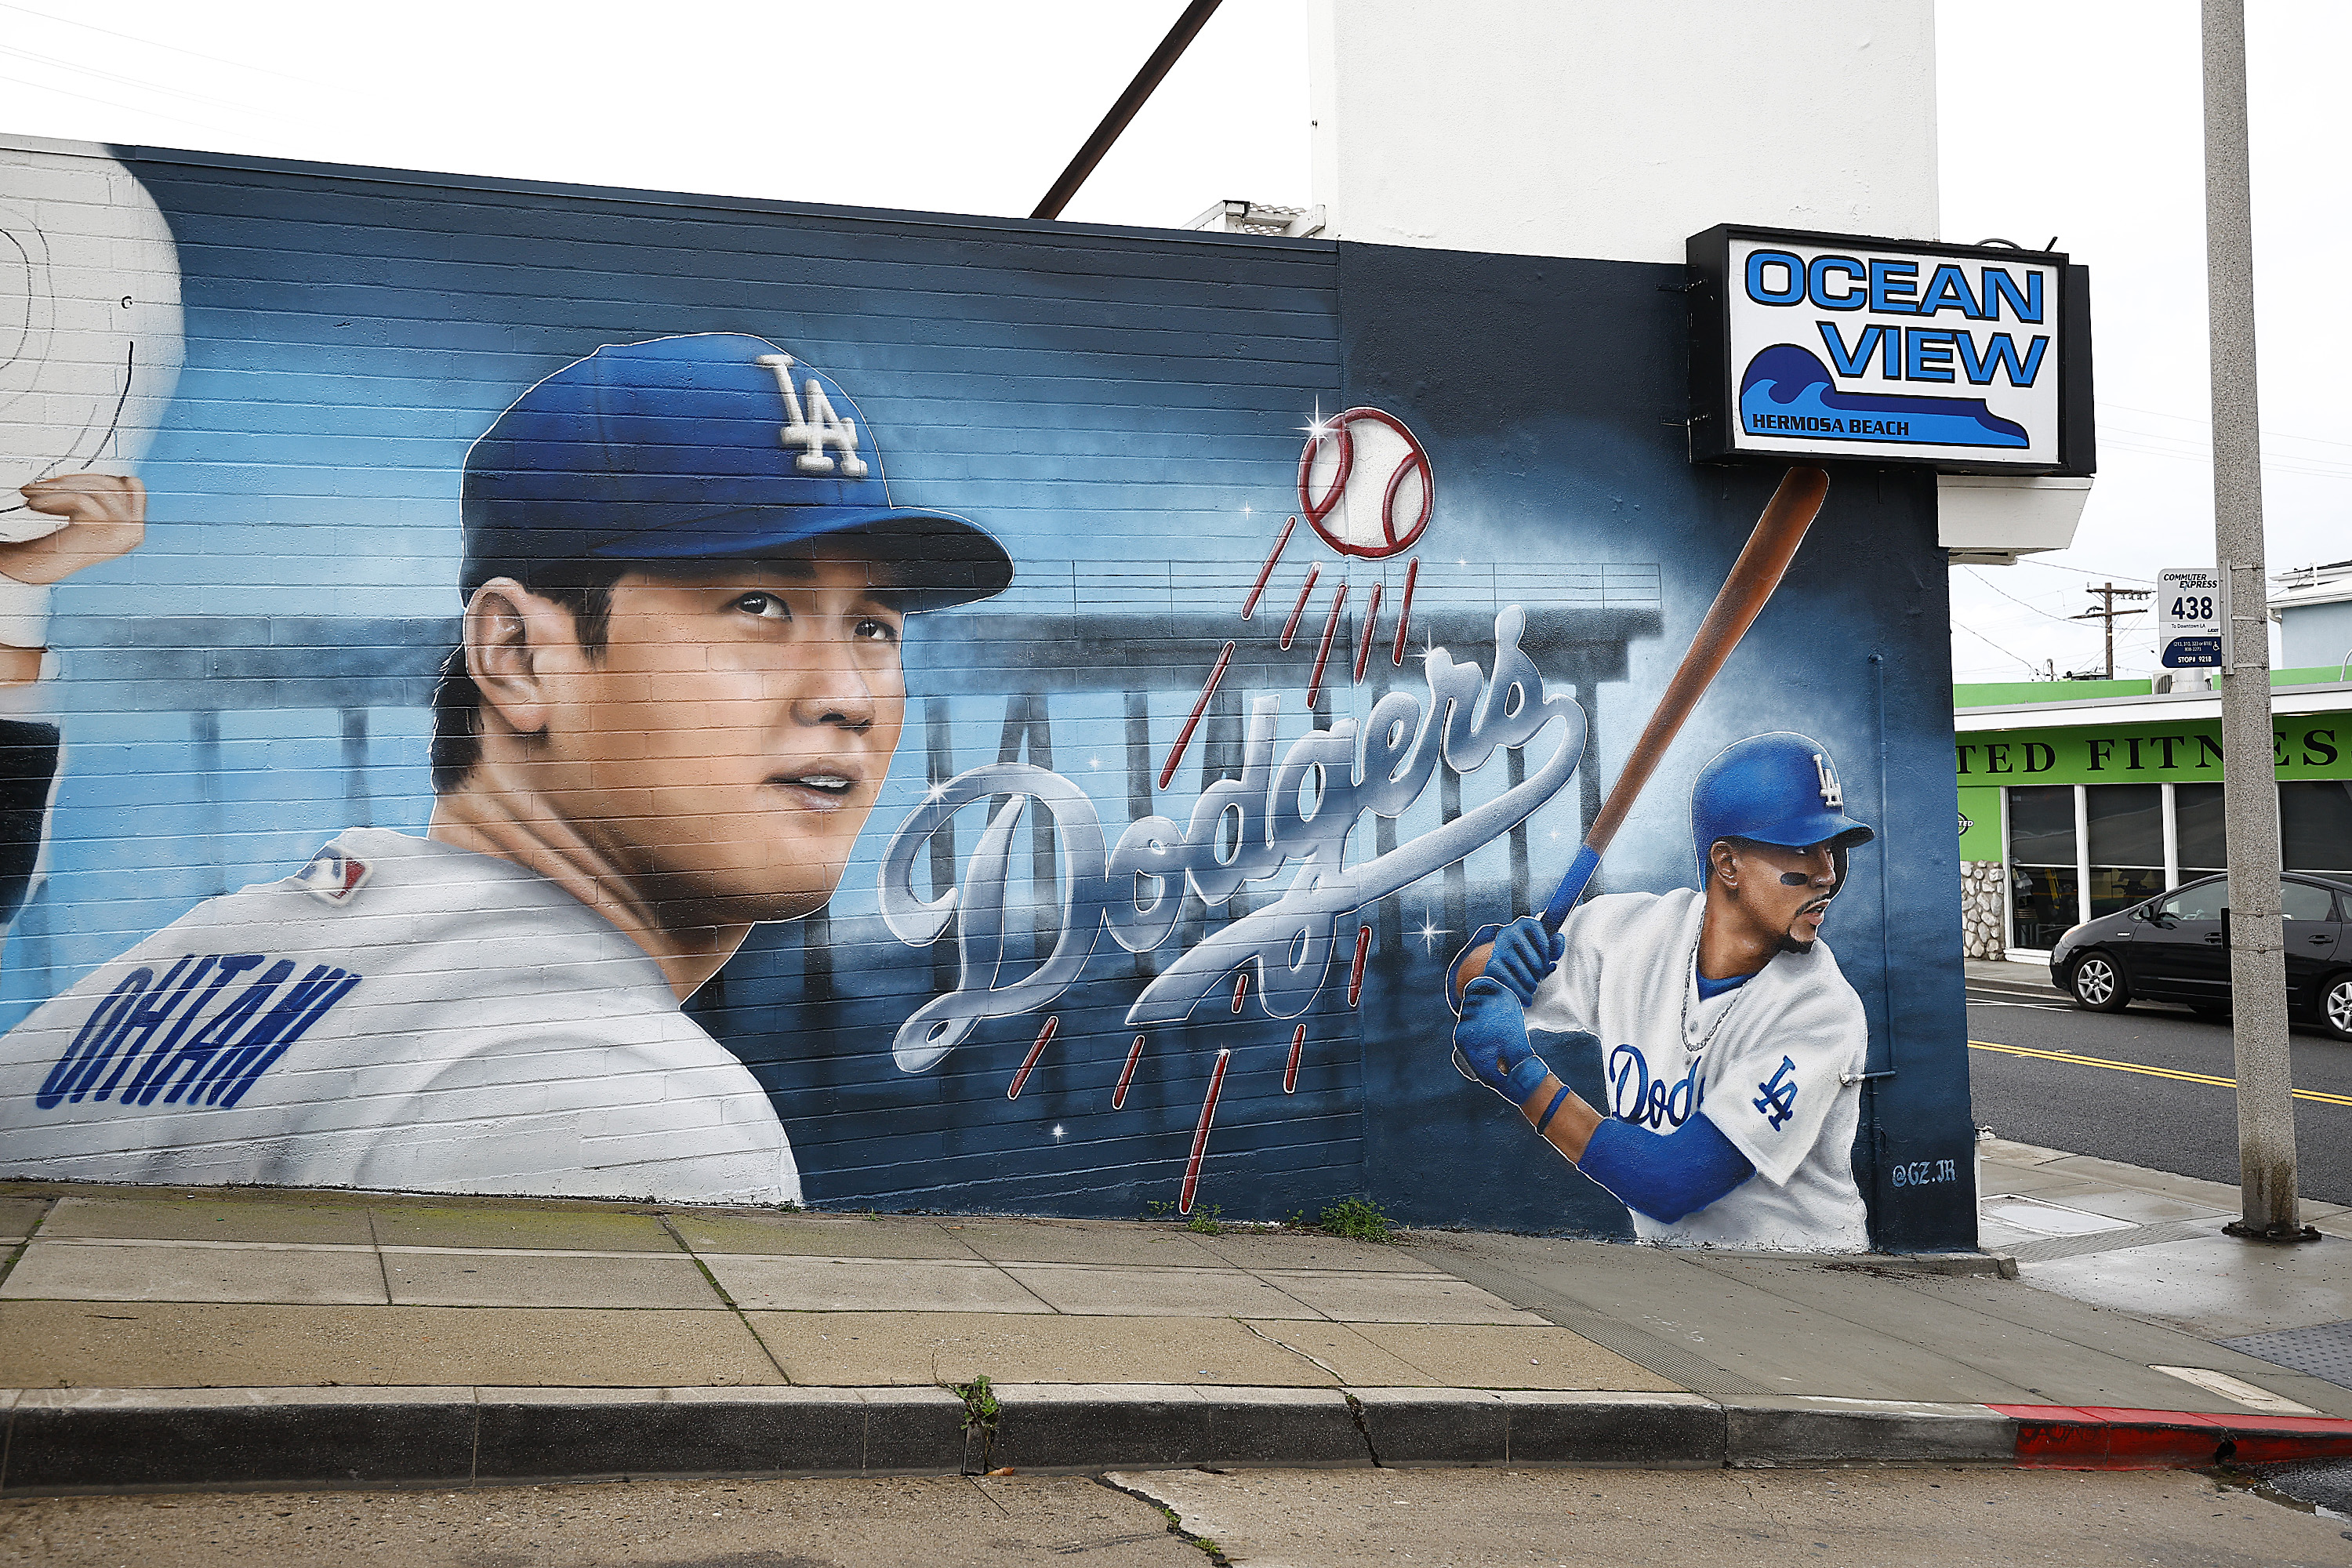 HERMOSA BEACH, CALIFORNIA - DECEMBER 21:  A mural of Shohei Ohtani of the Los Angeles Dodgers on the outside wall of Oceanview Liquor Store in Hermosa Beach on December 21, 2023.  The mural was completed by Gustavo Zermeno Jr in Hermosa Beach, California. (Photo by Ronald Martinez/Getty Images)